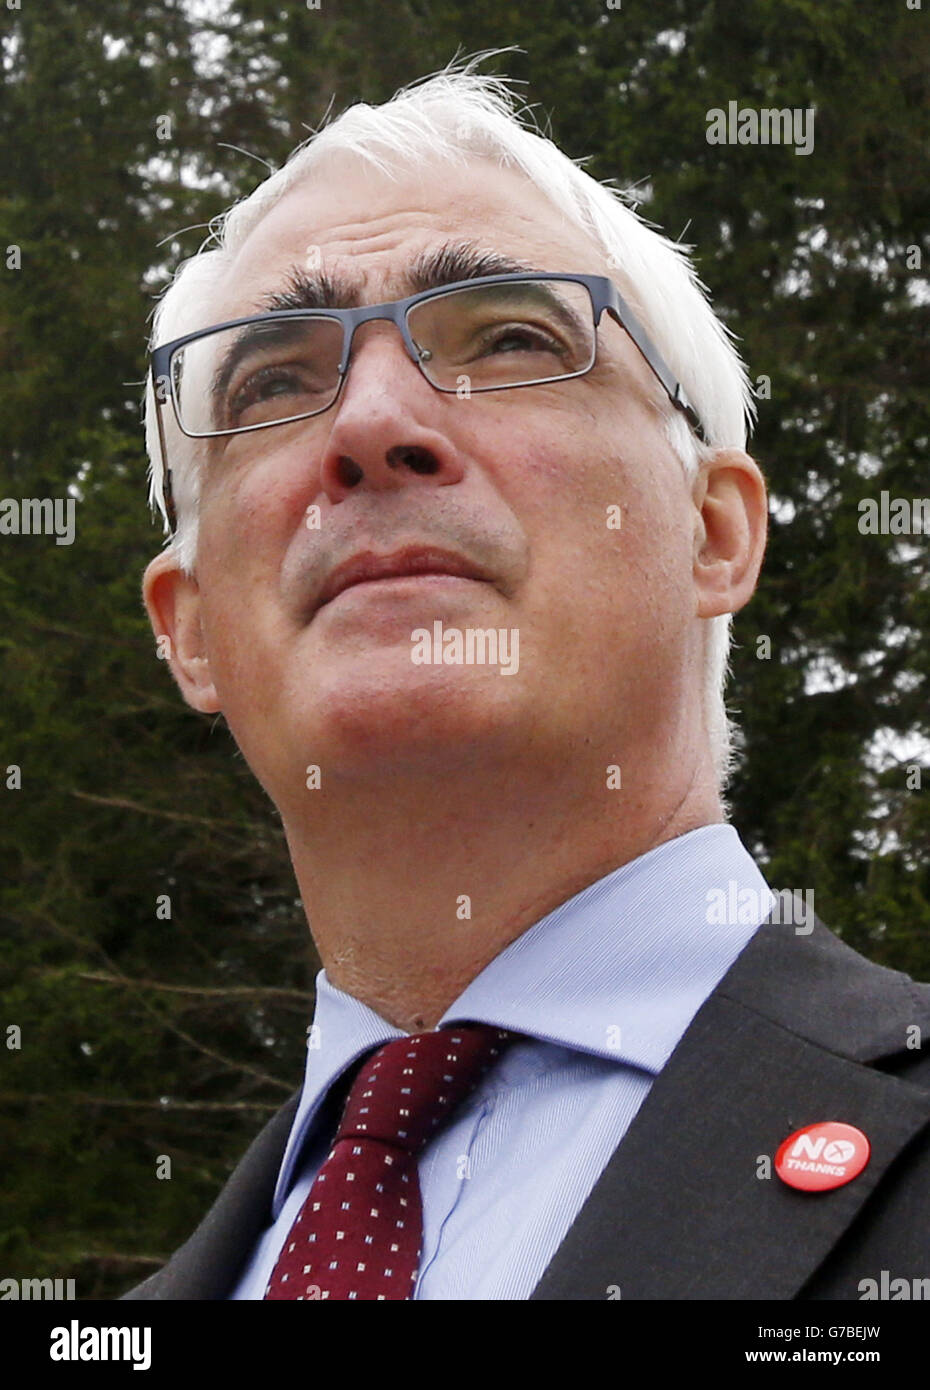 Better Together Leader Alistair Darling during a visit to HOBESCO Biomass Energy Centre near Banchory in Scotland as the Scottish independence referendum campaign continues. Stock Photo